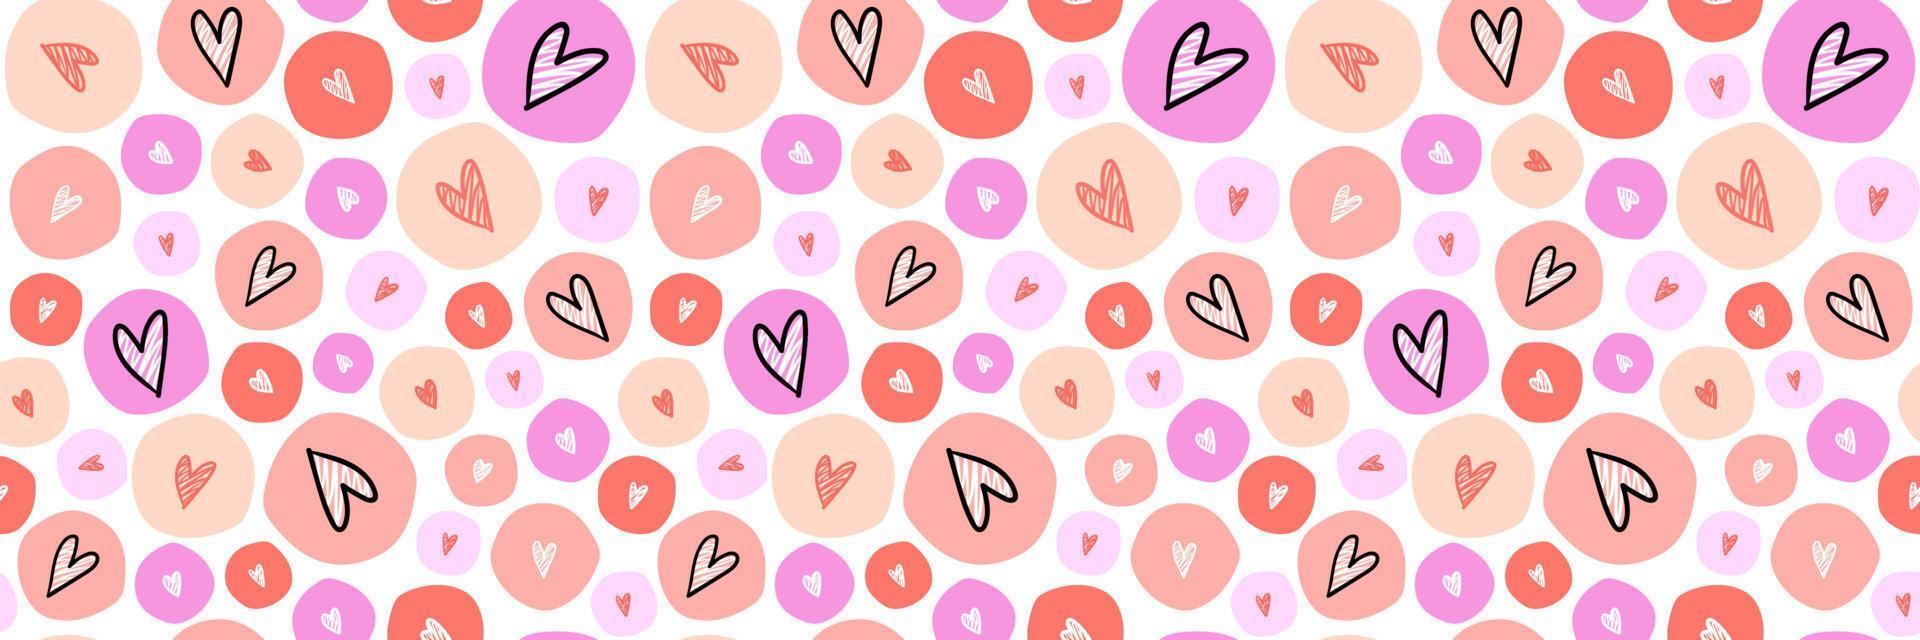 Colorful bubbles with sketch Hearts seamless pattern. Girlish design for surface, textile, wrapping, postcard, invitation. Valentines Day print. Vector illustration.